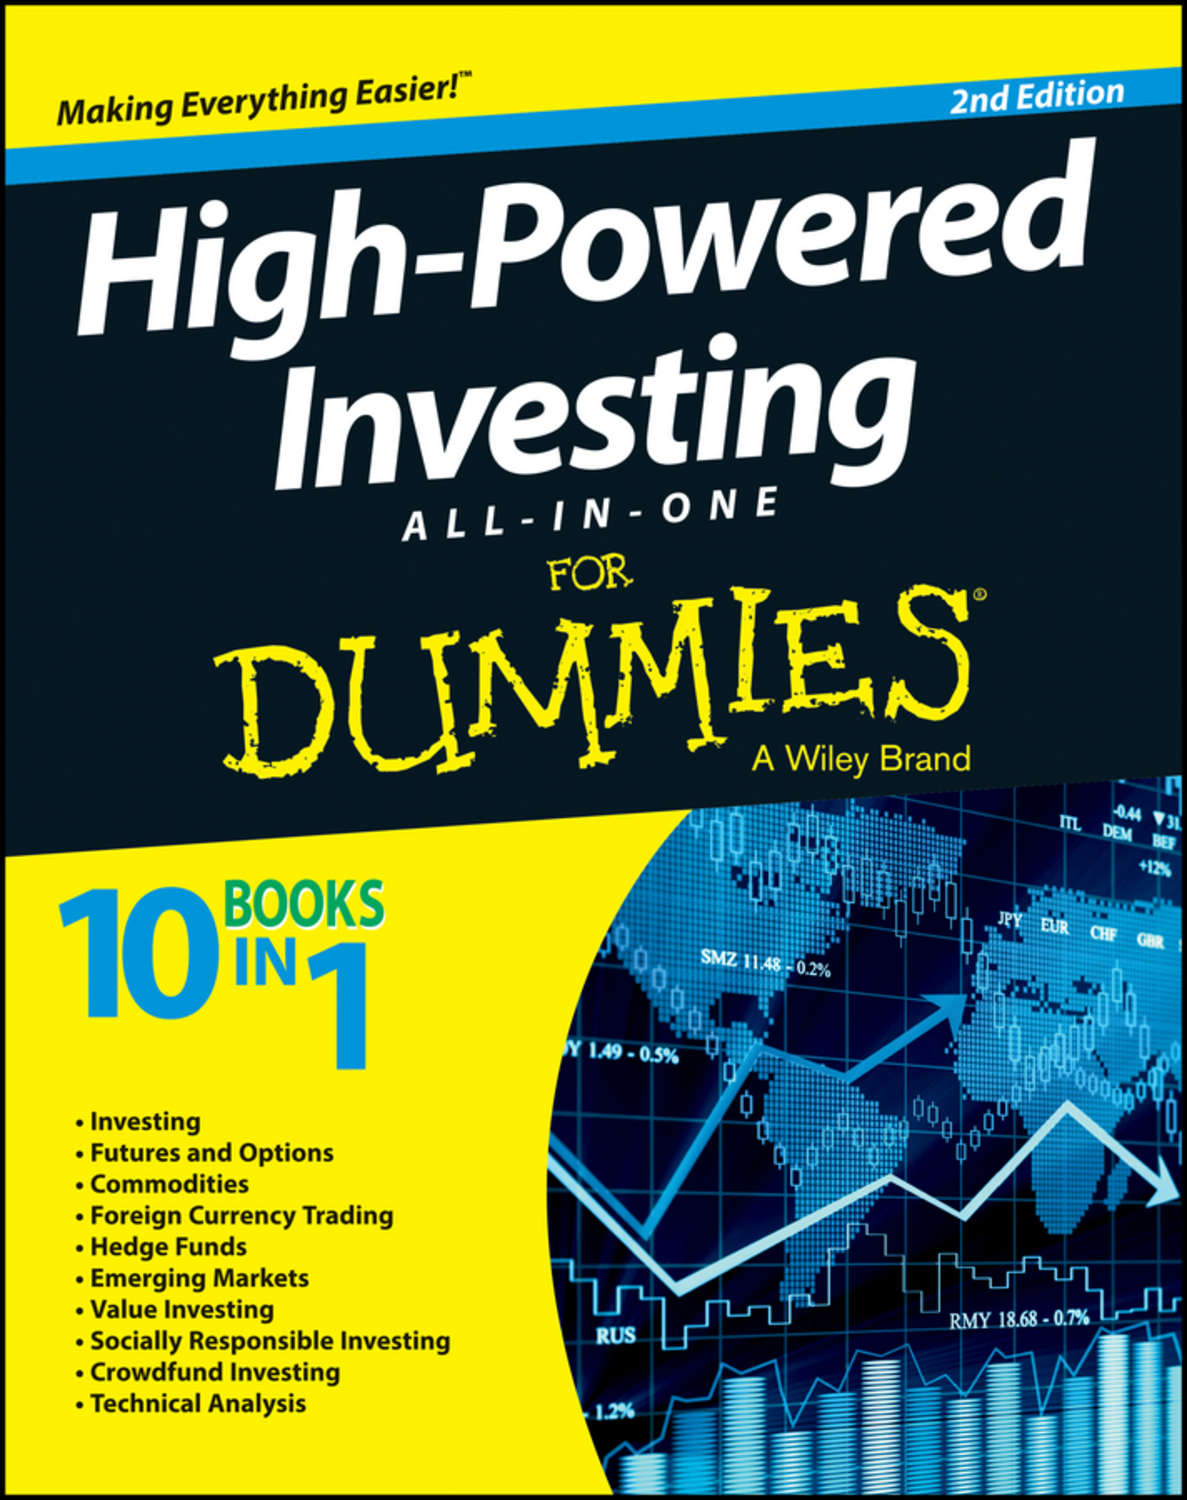 High-powered investing all-in-one for dummies downloads tether bitcoin monero price